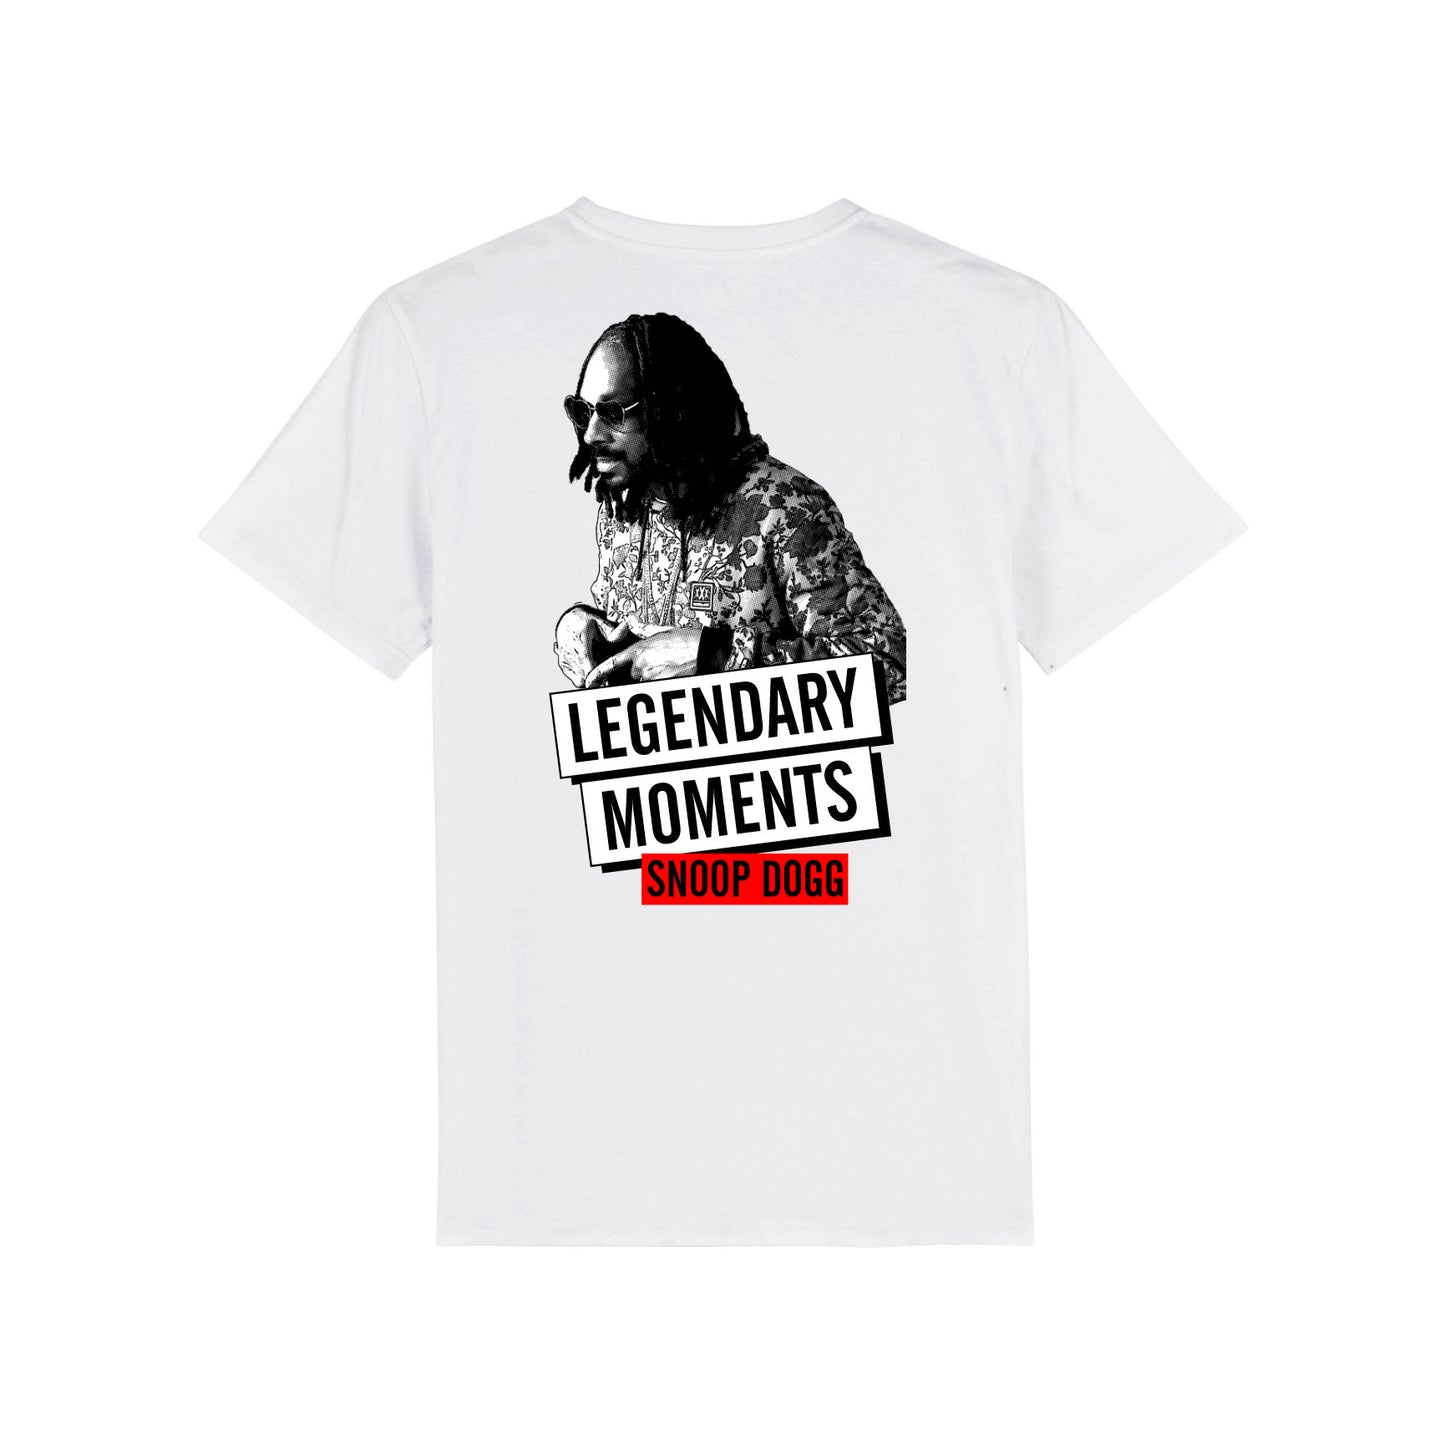 LIMITED EDITION - Legendary Moments - Snoop Dogg - Unisex T-Shirt - White